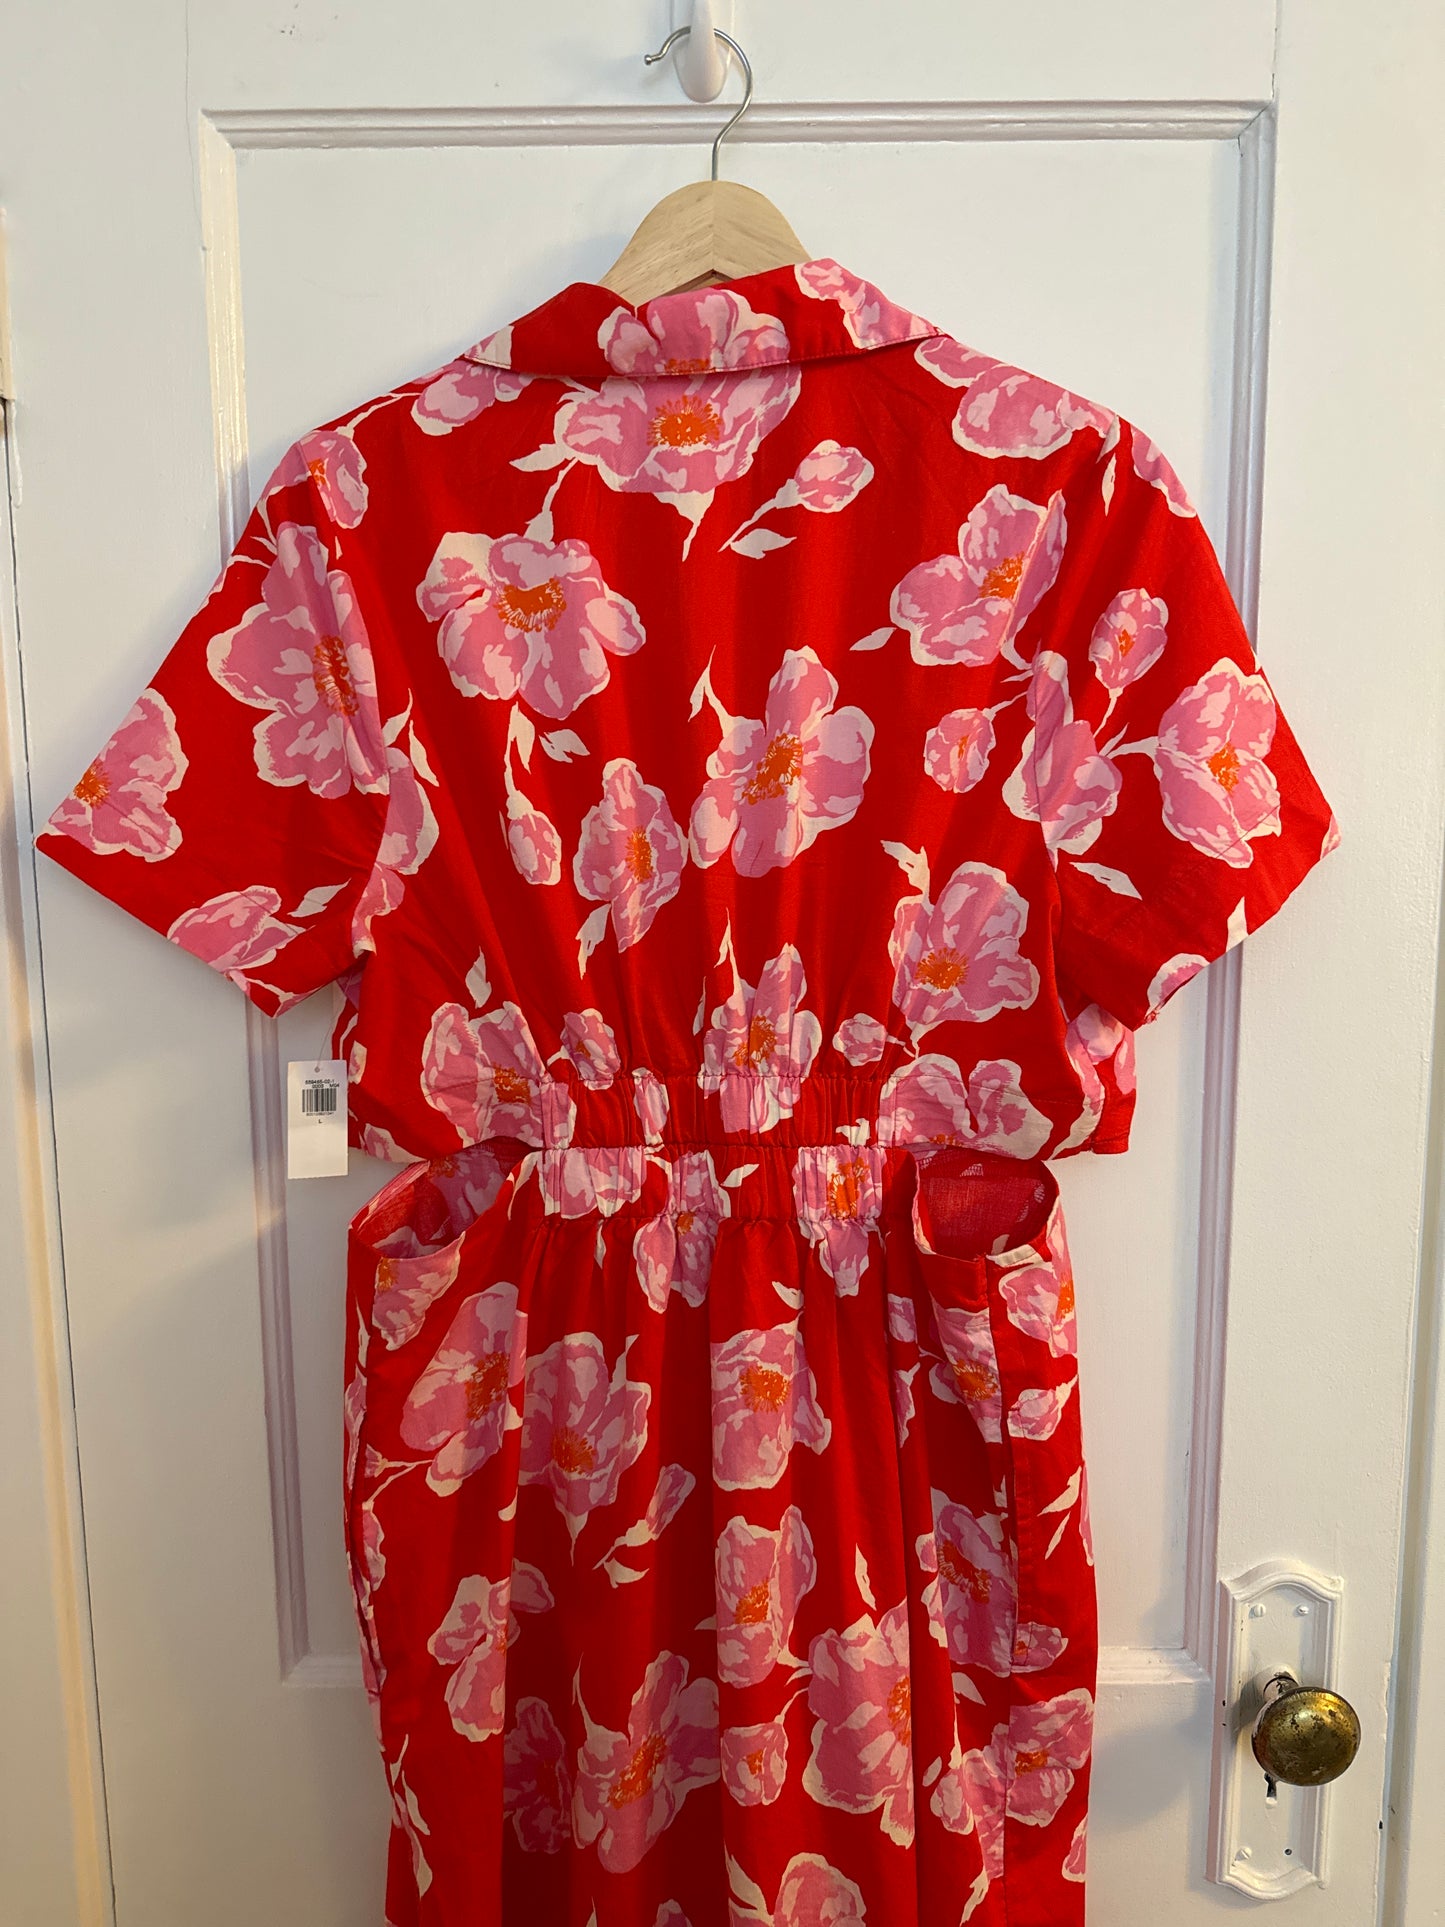 Old Navy Red and Pink Floral Shirt Dress NEW WITH TAGS, Women's Size L